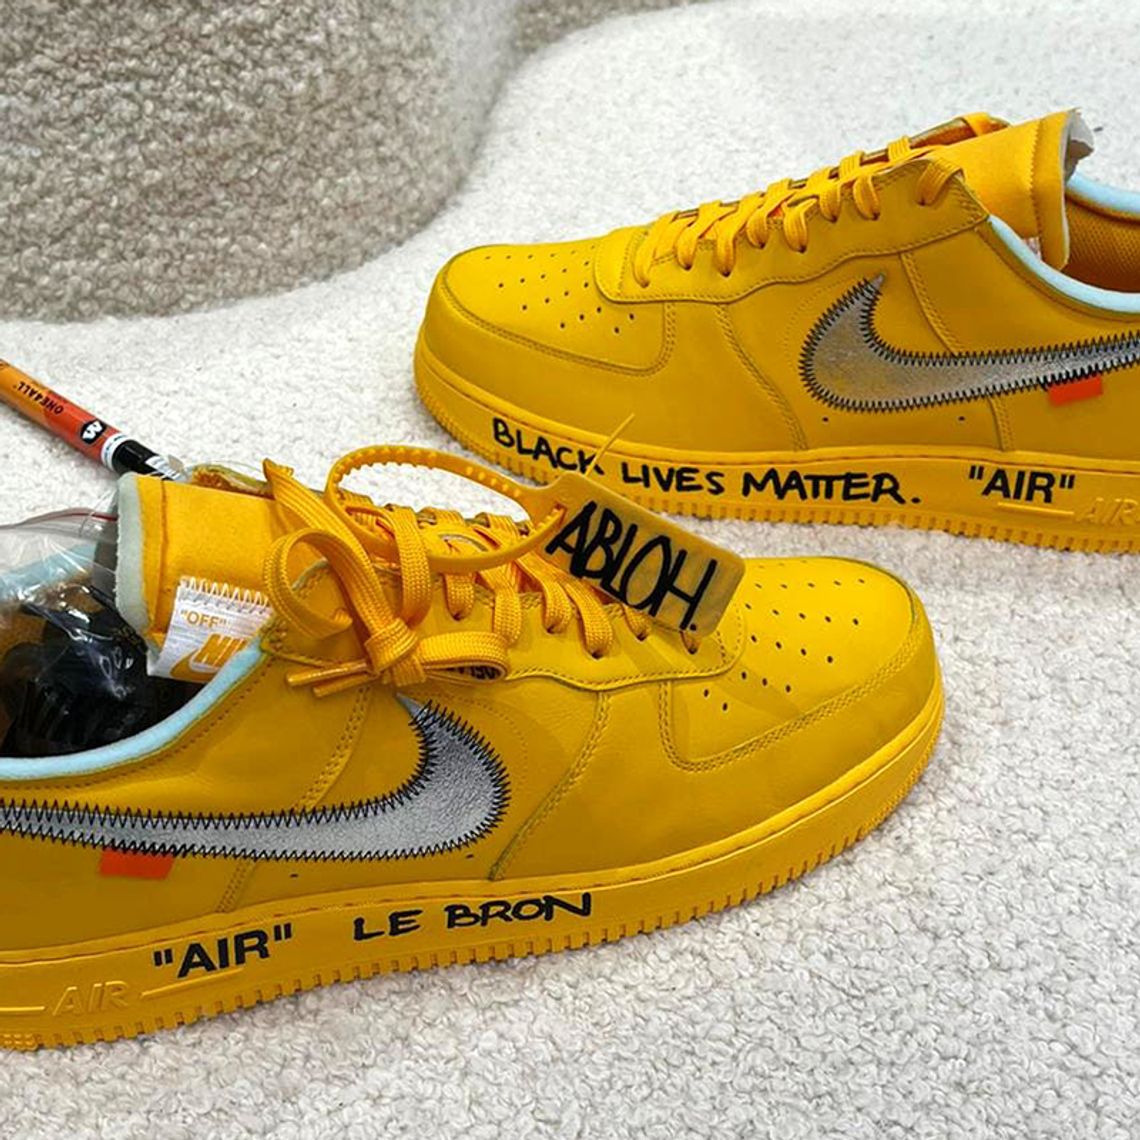 Up Close Look At The Off-White Nike AF1 ICA Universiry Gold